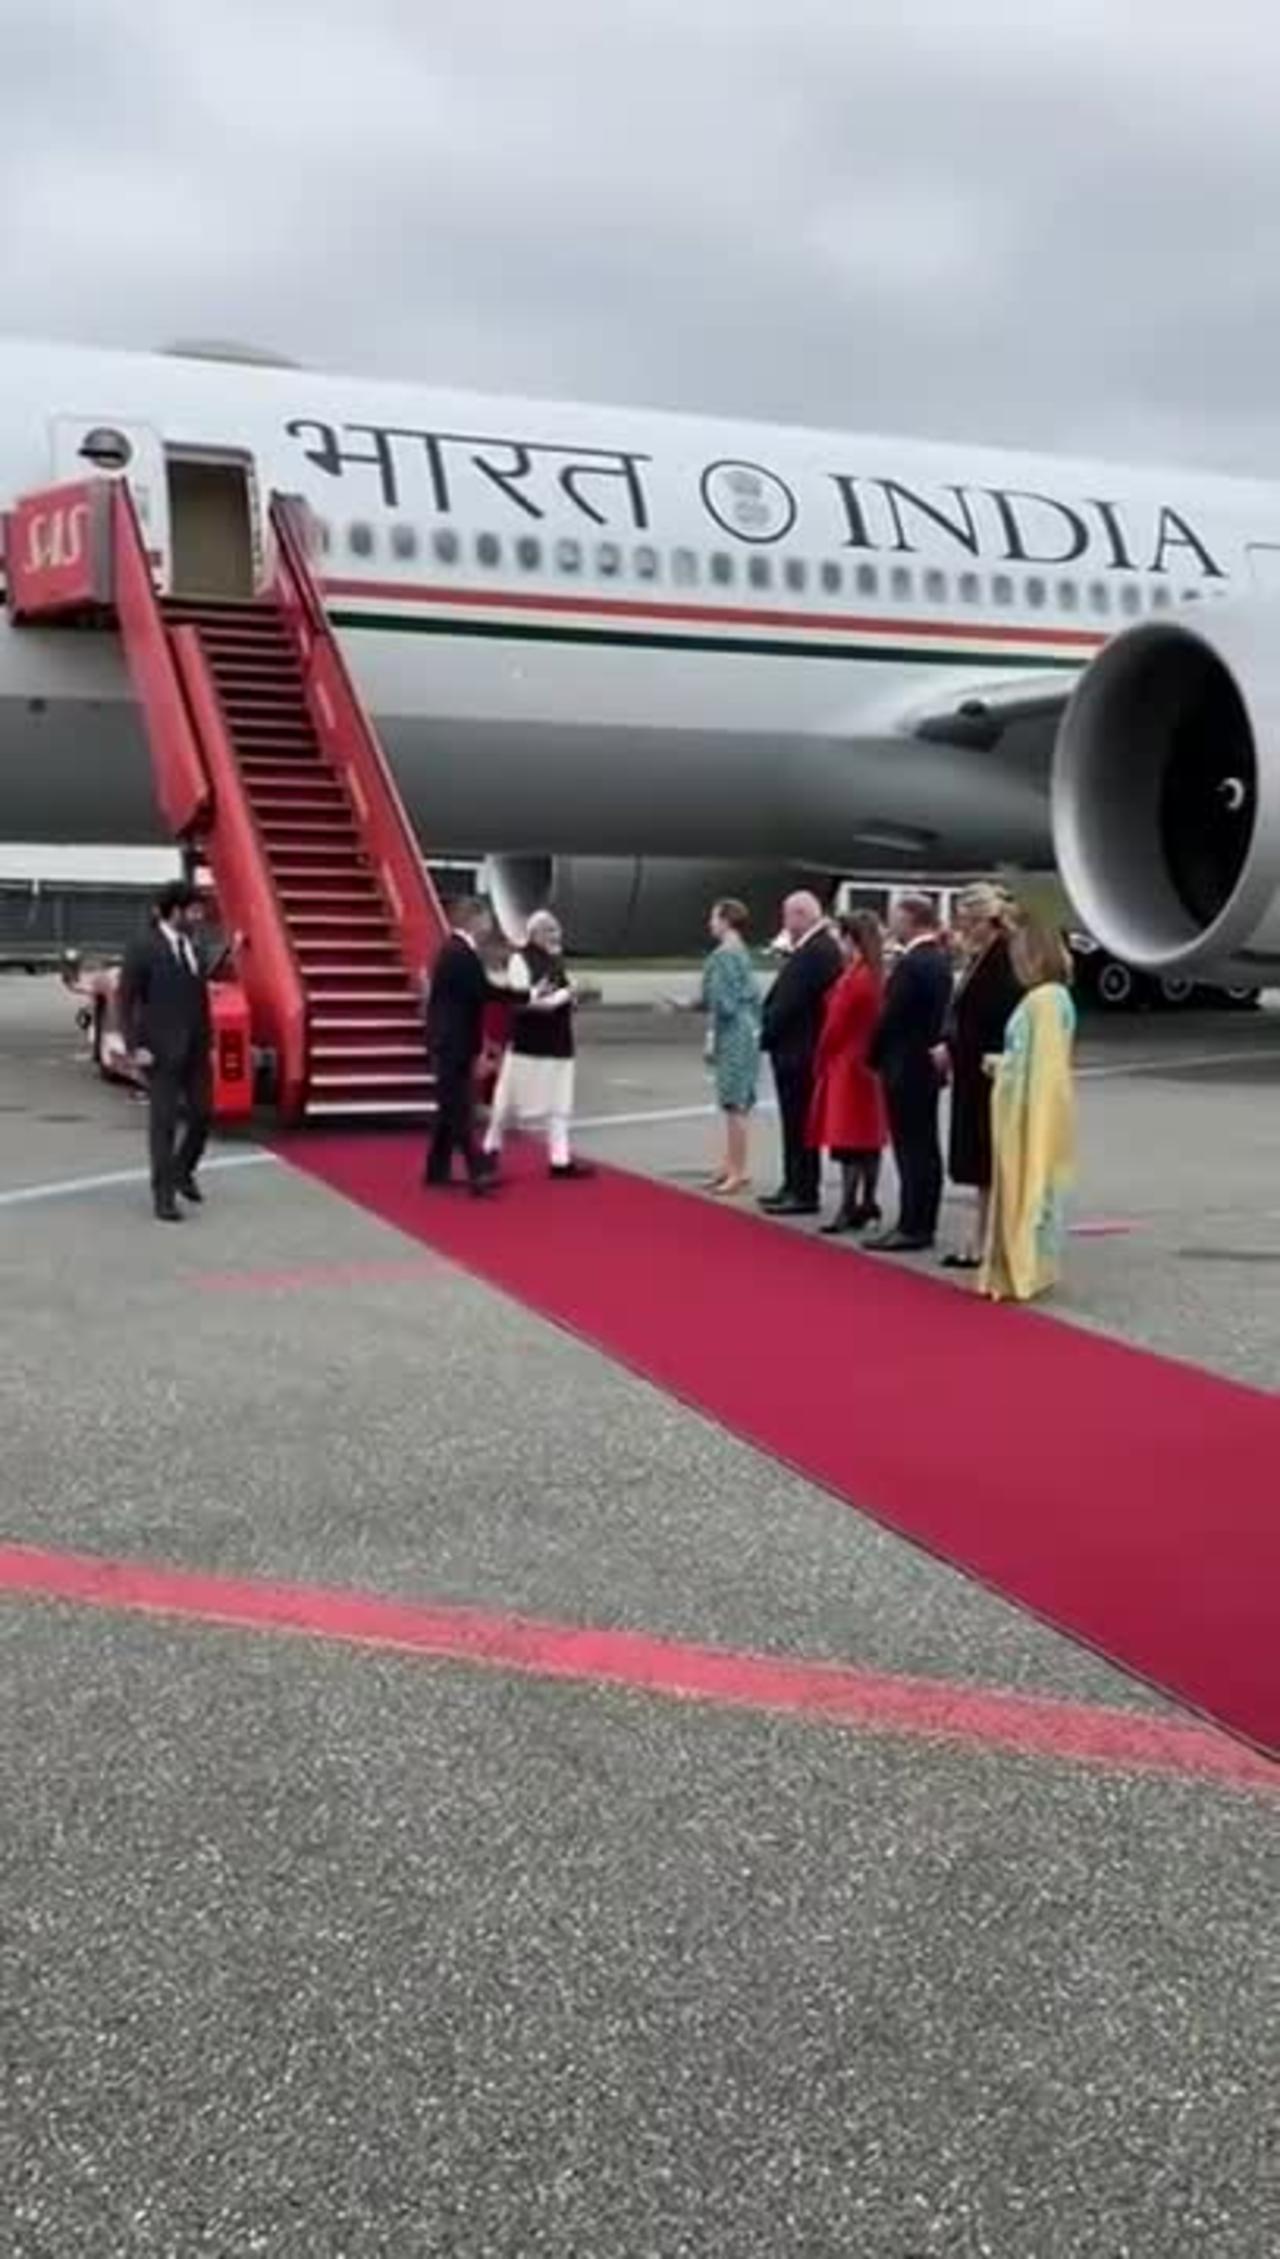 Danish PM Frederiksen received Modi at the airport his arrived at Copenhagen